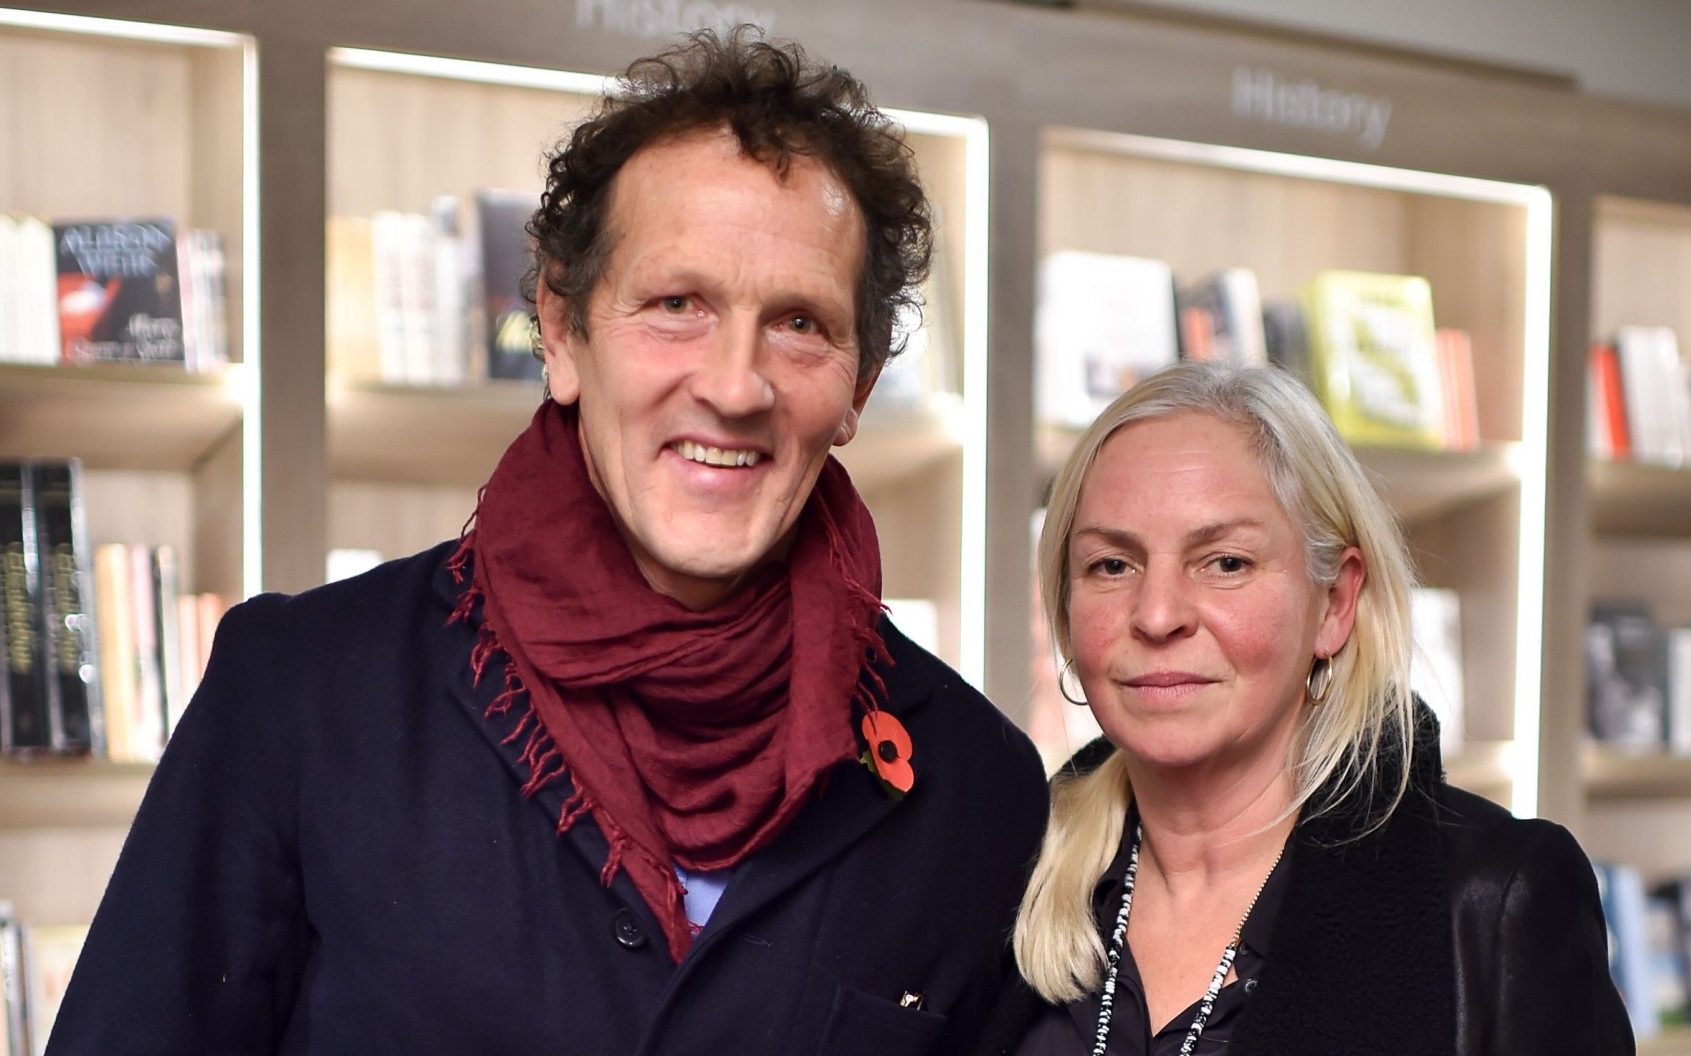 monty don: ‘how can i atone for being white and middle-class? that’s not the point’